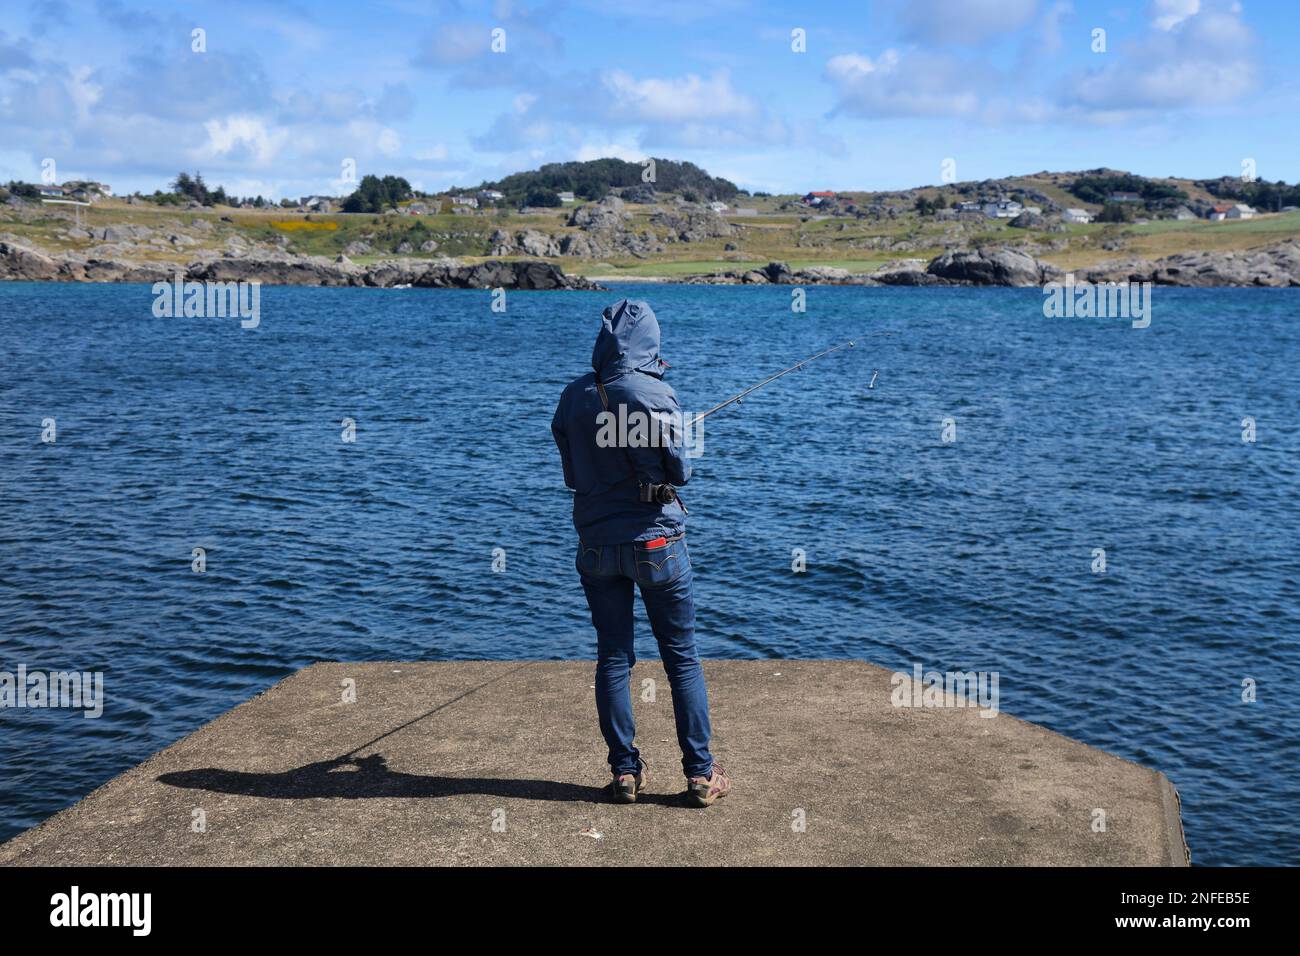 Norway spin fishing. Woman angler at a pier in Karmoy island, Rogaland region. Stock Photo